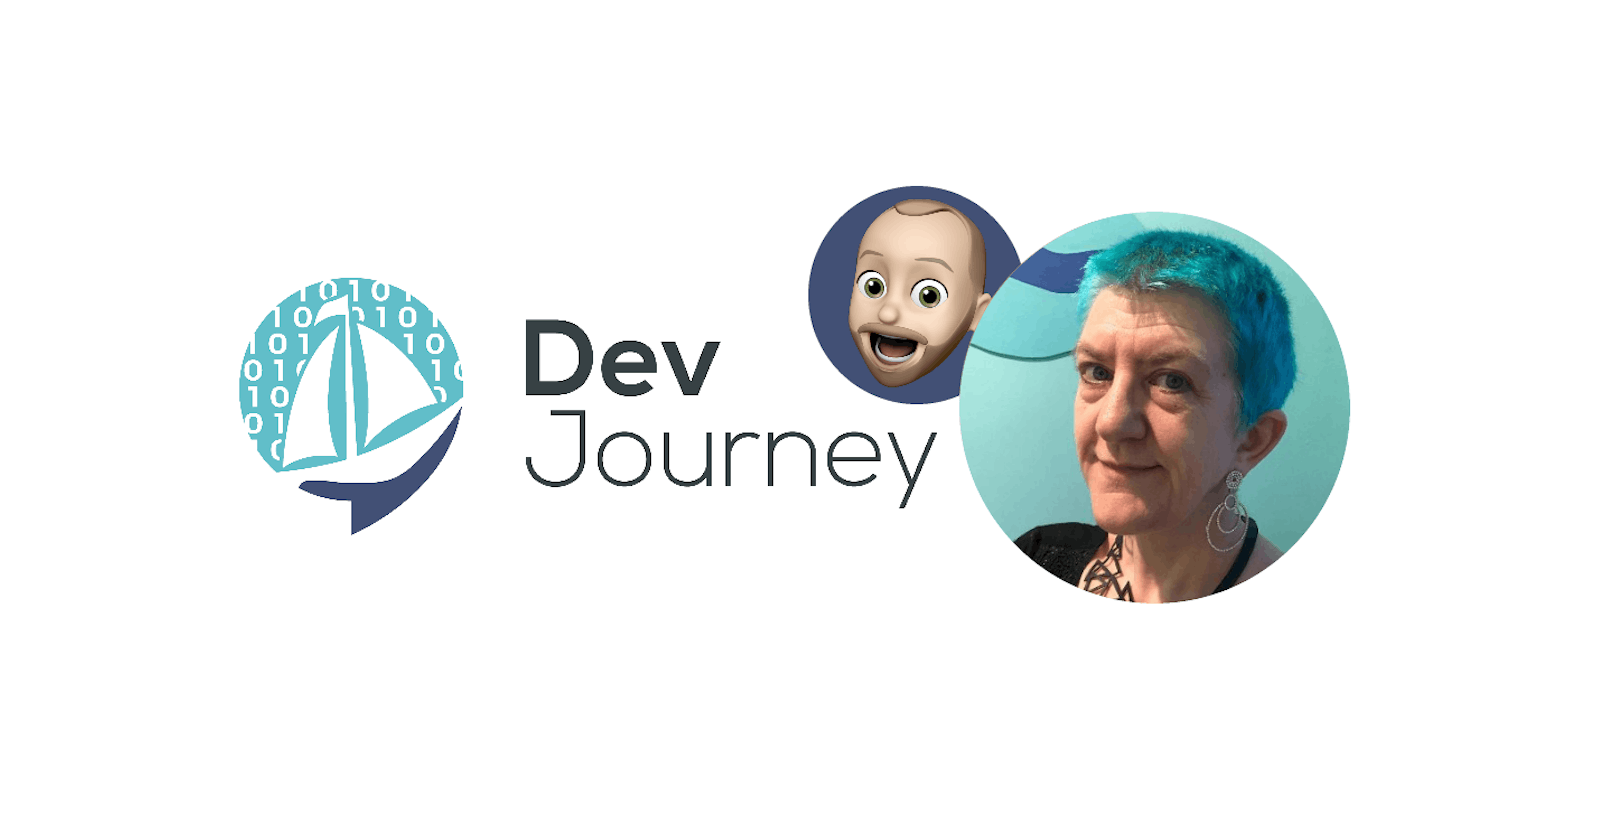 Clare Sudbery surfing on her imposter syndrome and other things I learned recording her DevJourney (#156)